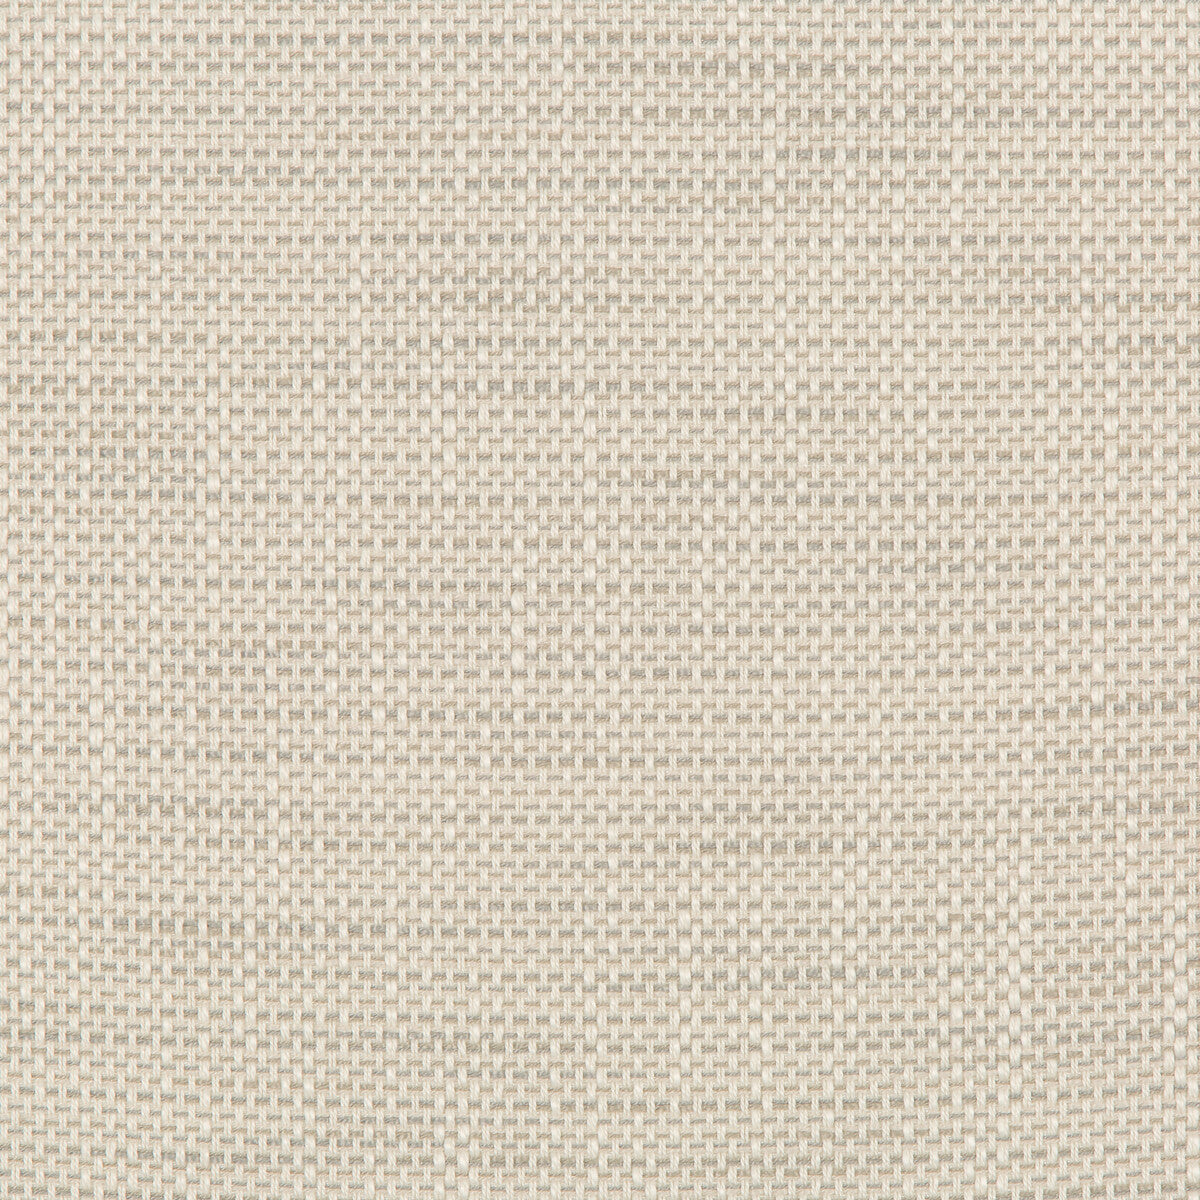 Kravet Design fabric in 36082-1101 color - pattern 36082.1101.0 - by Kravet Design in the Inside Out Performance Fabrics collection